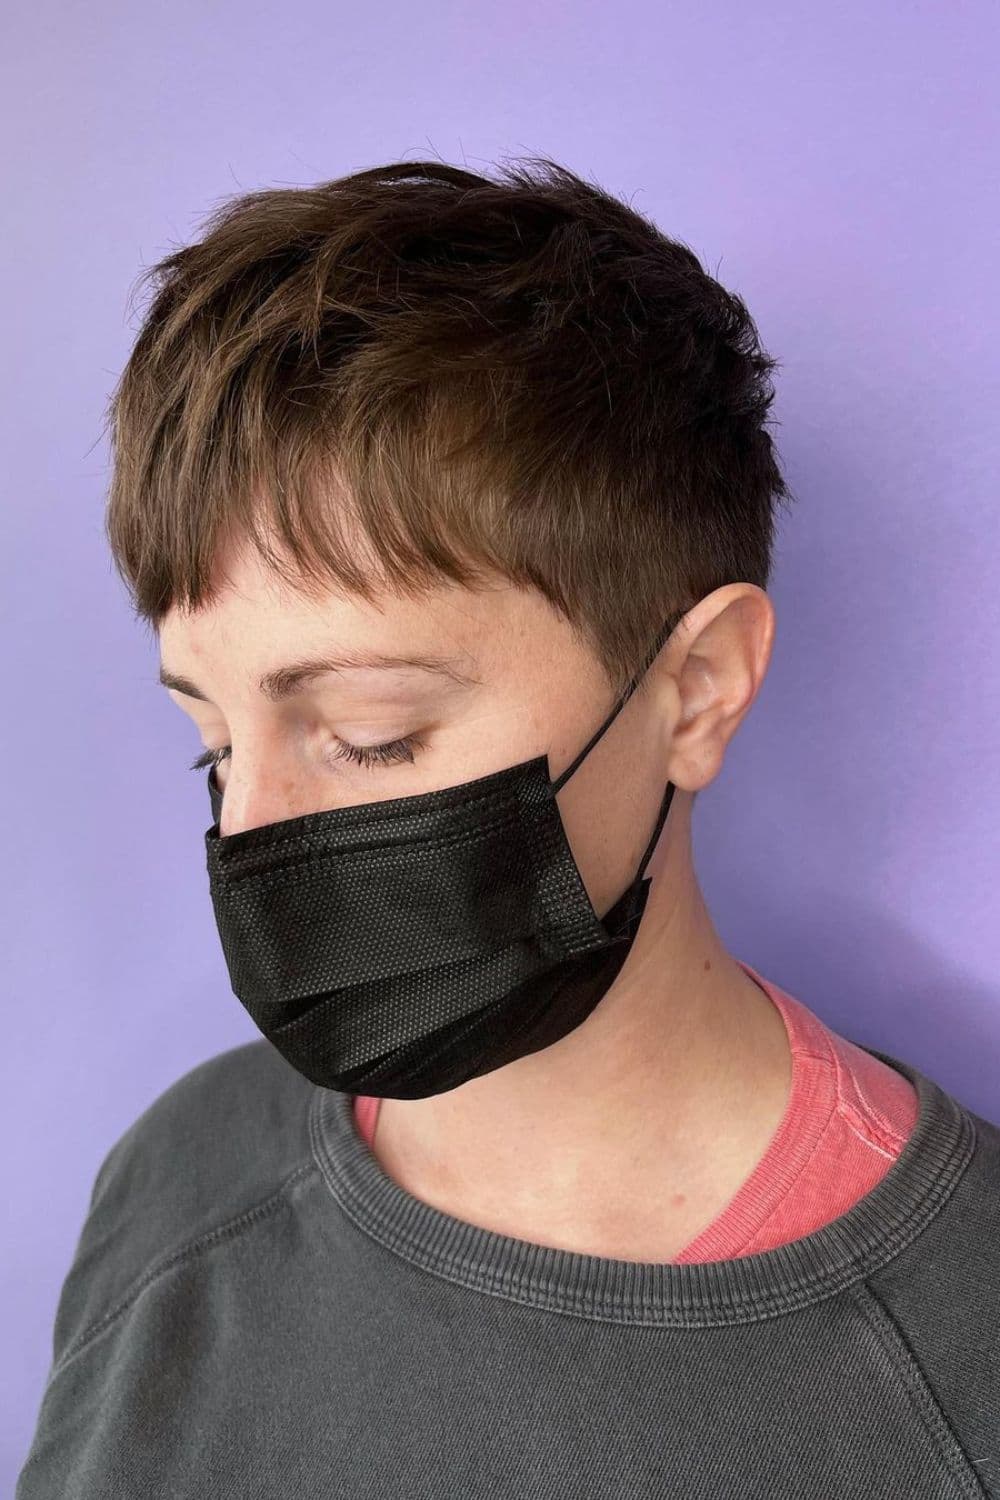 A woman wearing a black surgical mask with a tousled pixie cut.